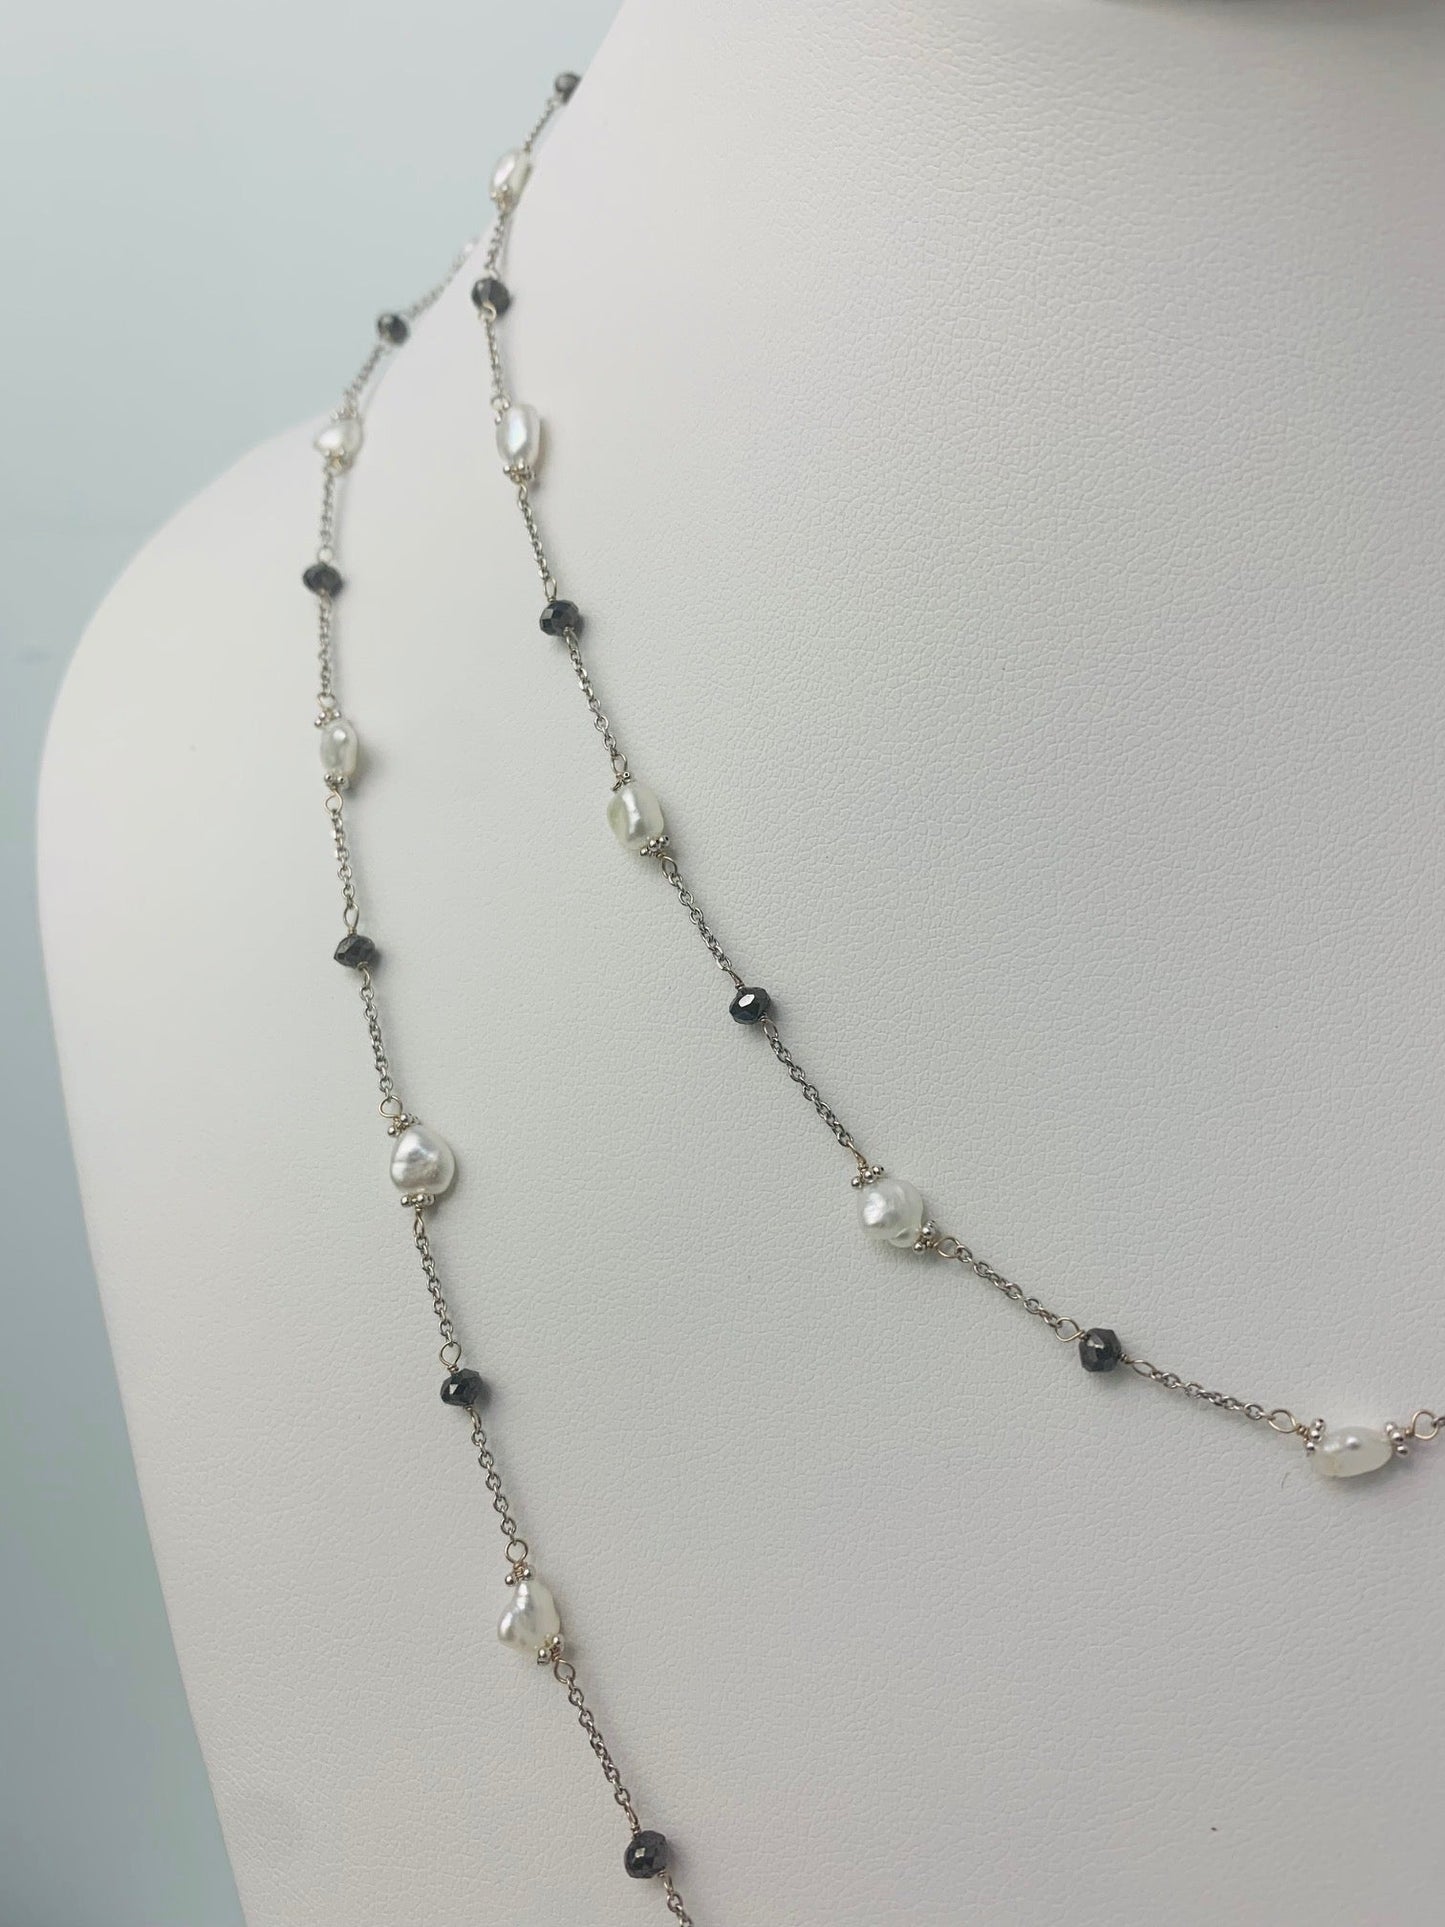 44" Black Diamond and Keshi Pearl Station Necklace in 14KW - NCK-114-TNCPRLDIA14W-WHBLK-44-02827 6ctw